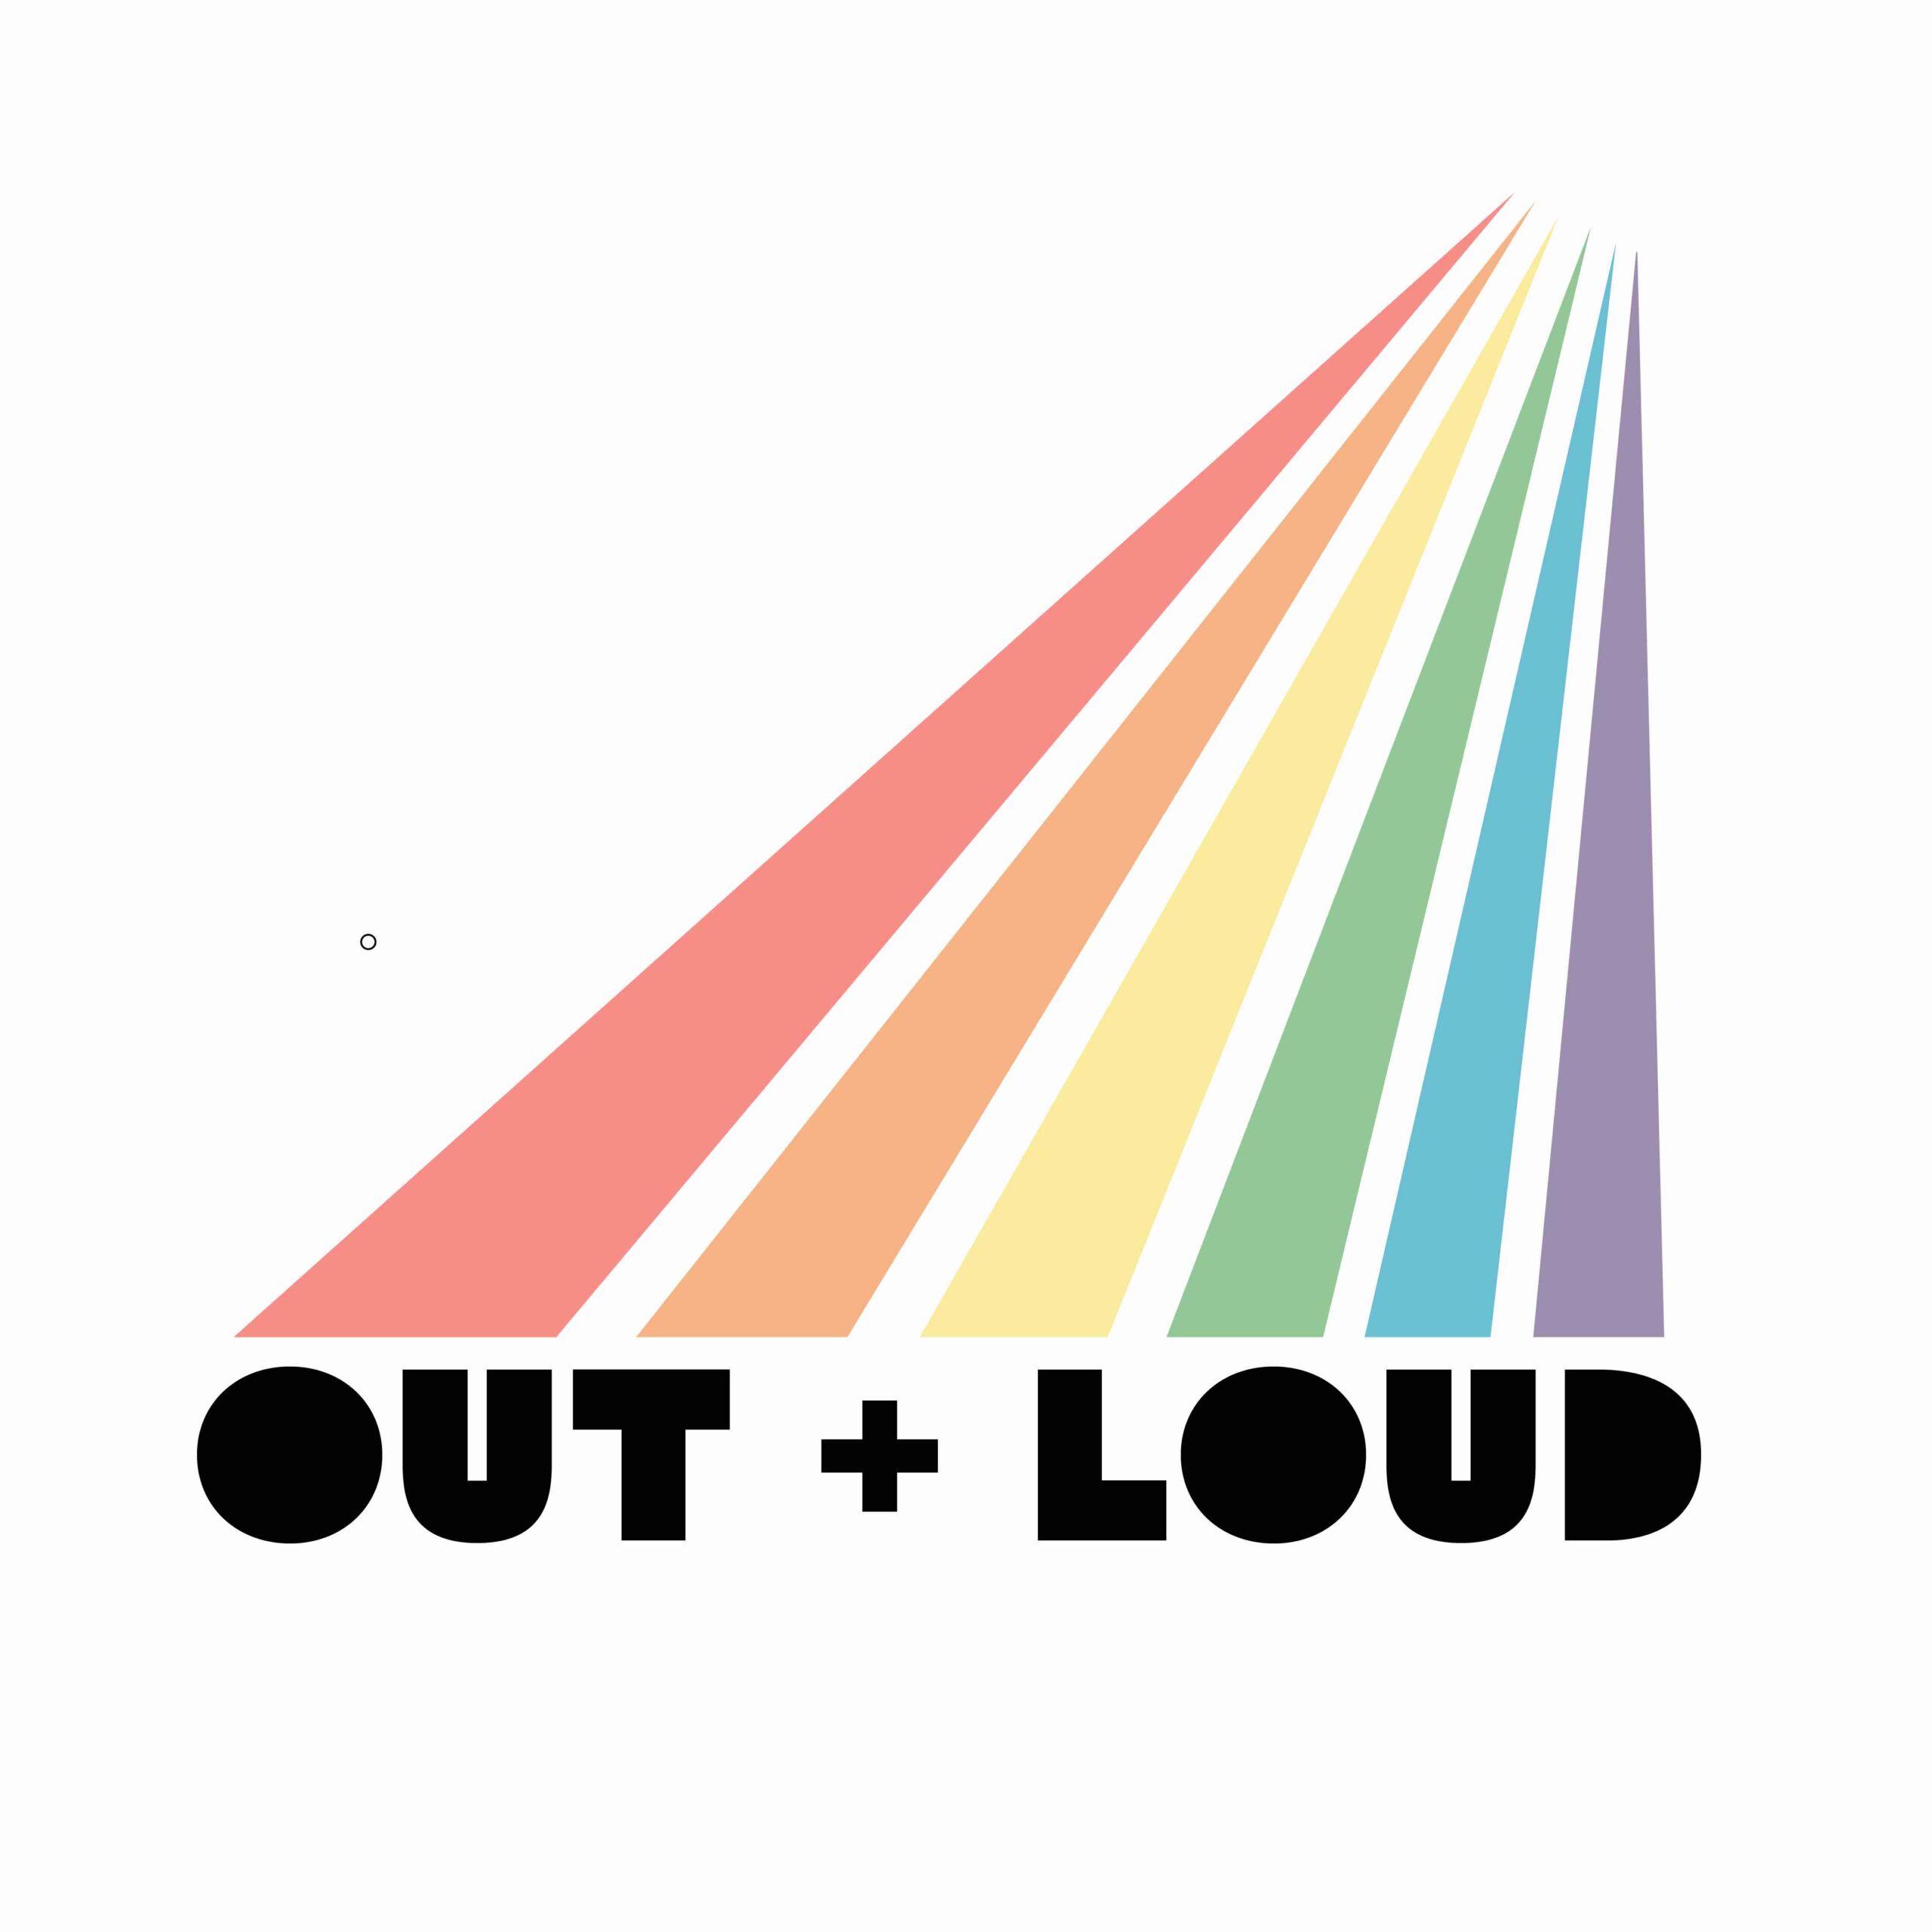 Out + Loud